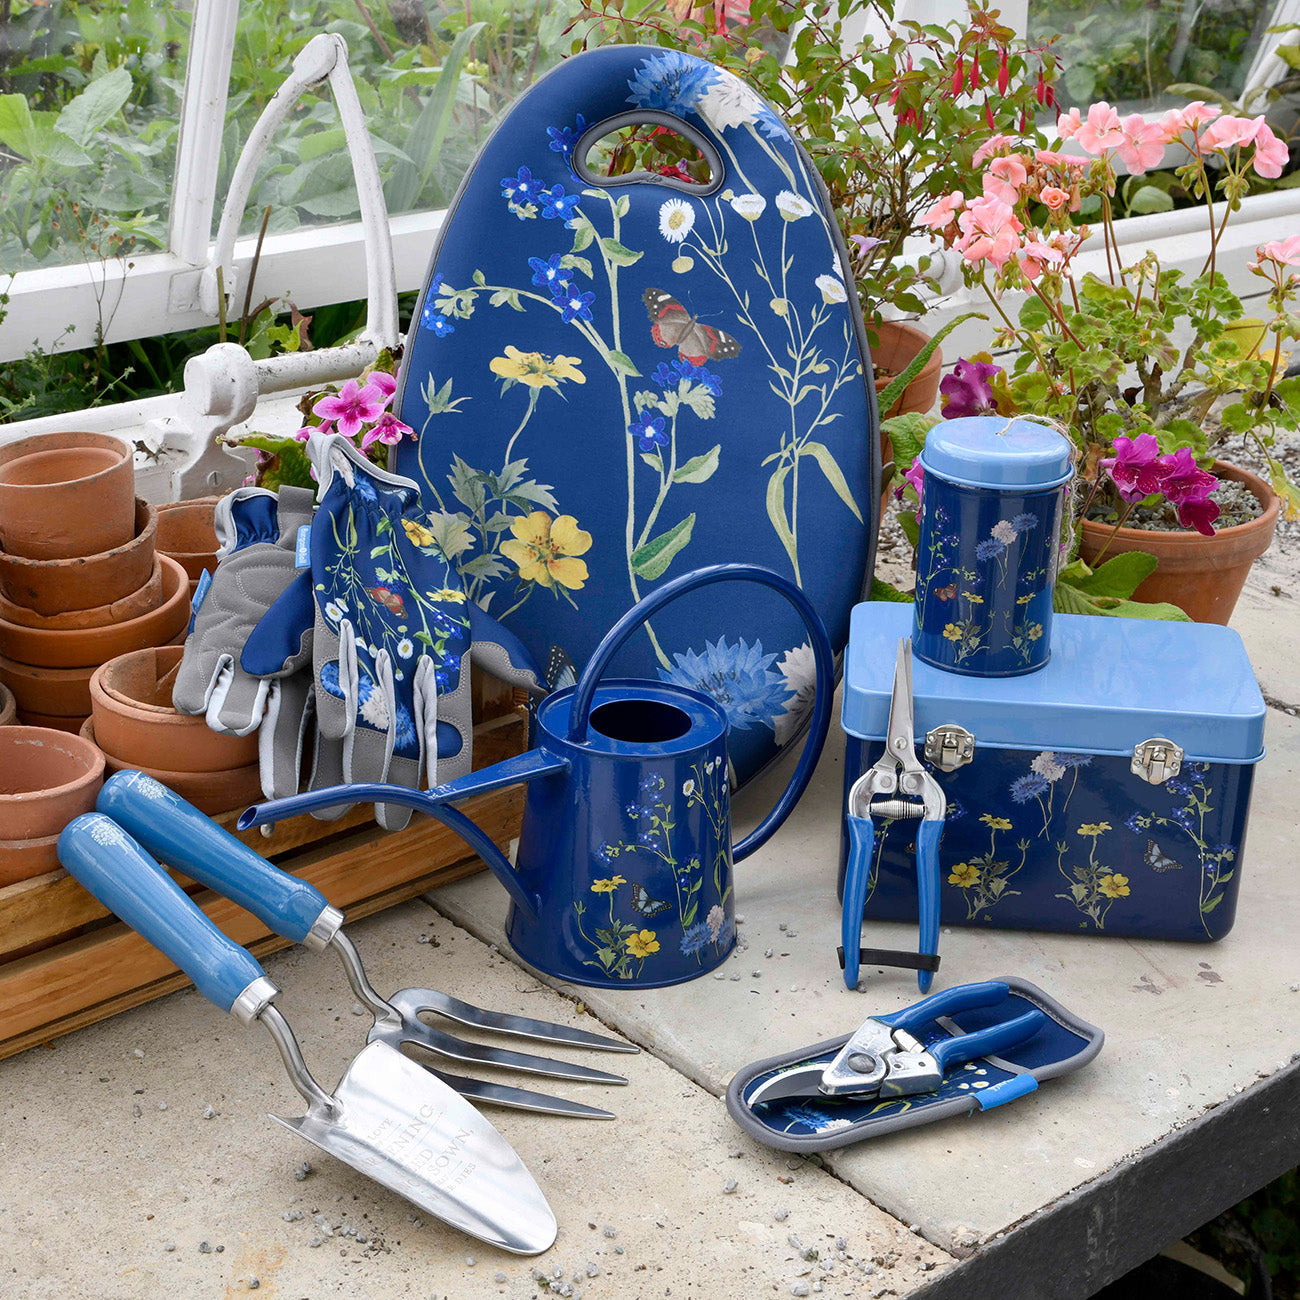 The full RHS Gifts for Gardeners 'British Meadow' collection.